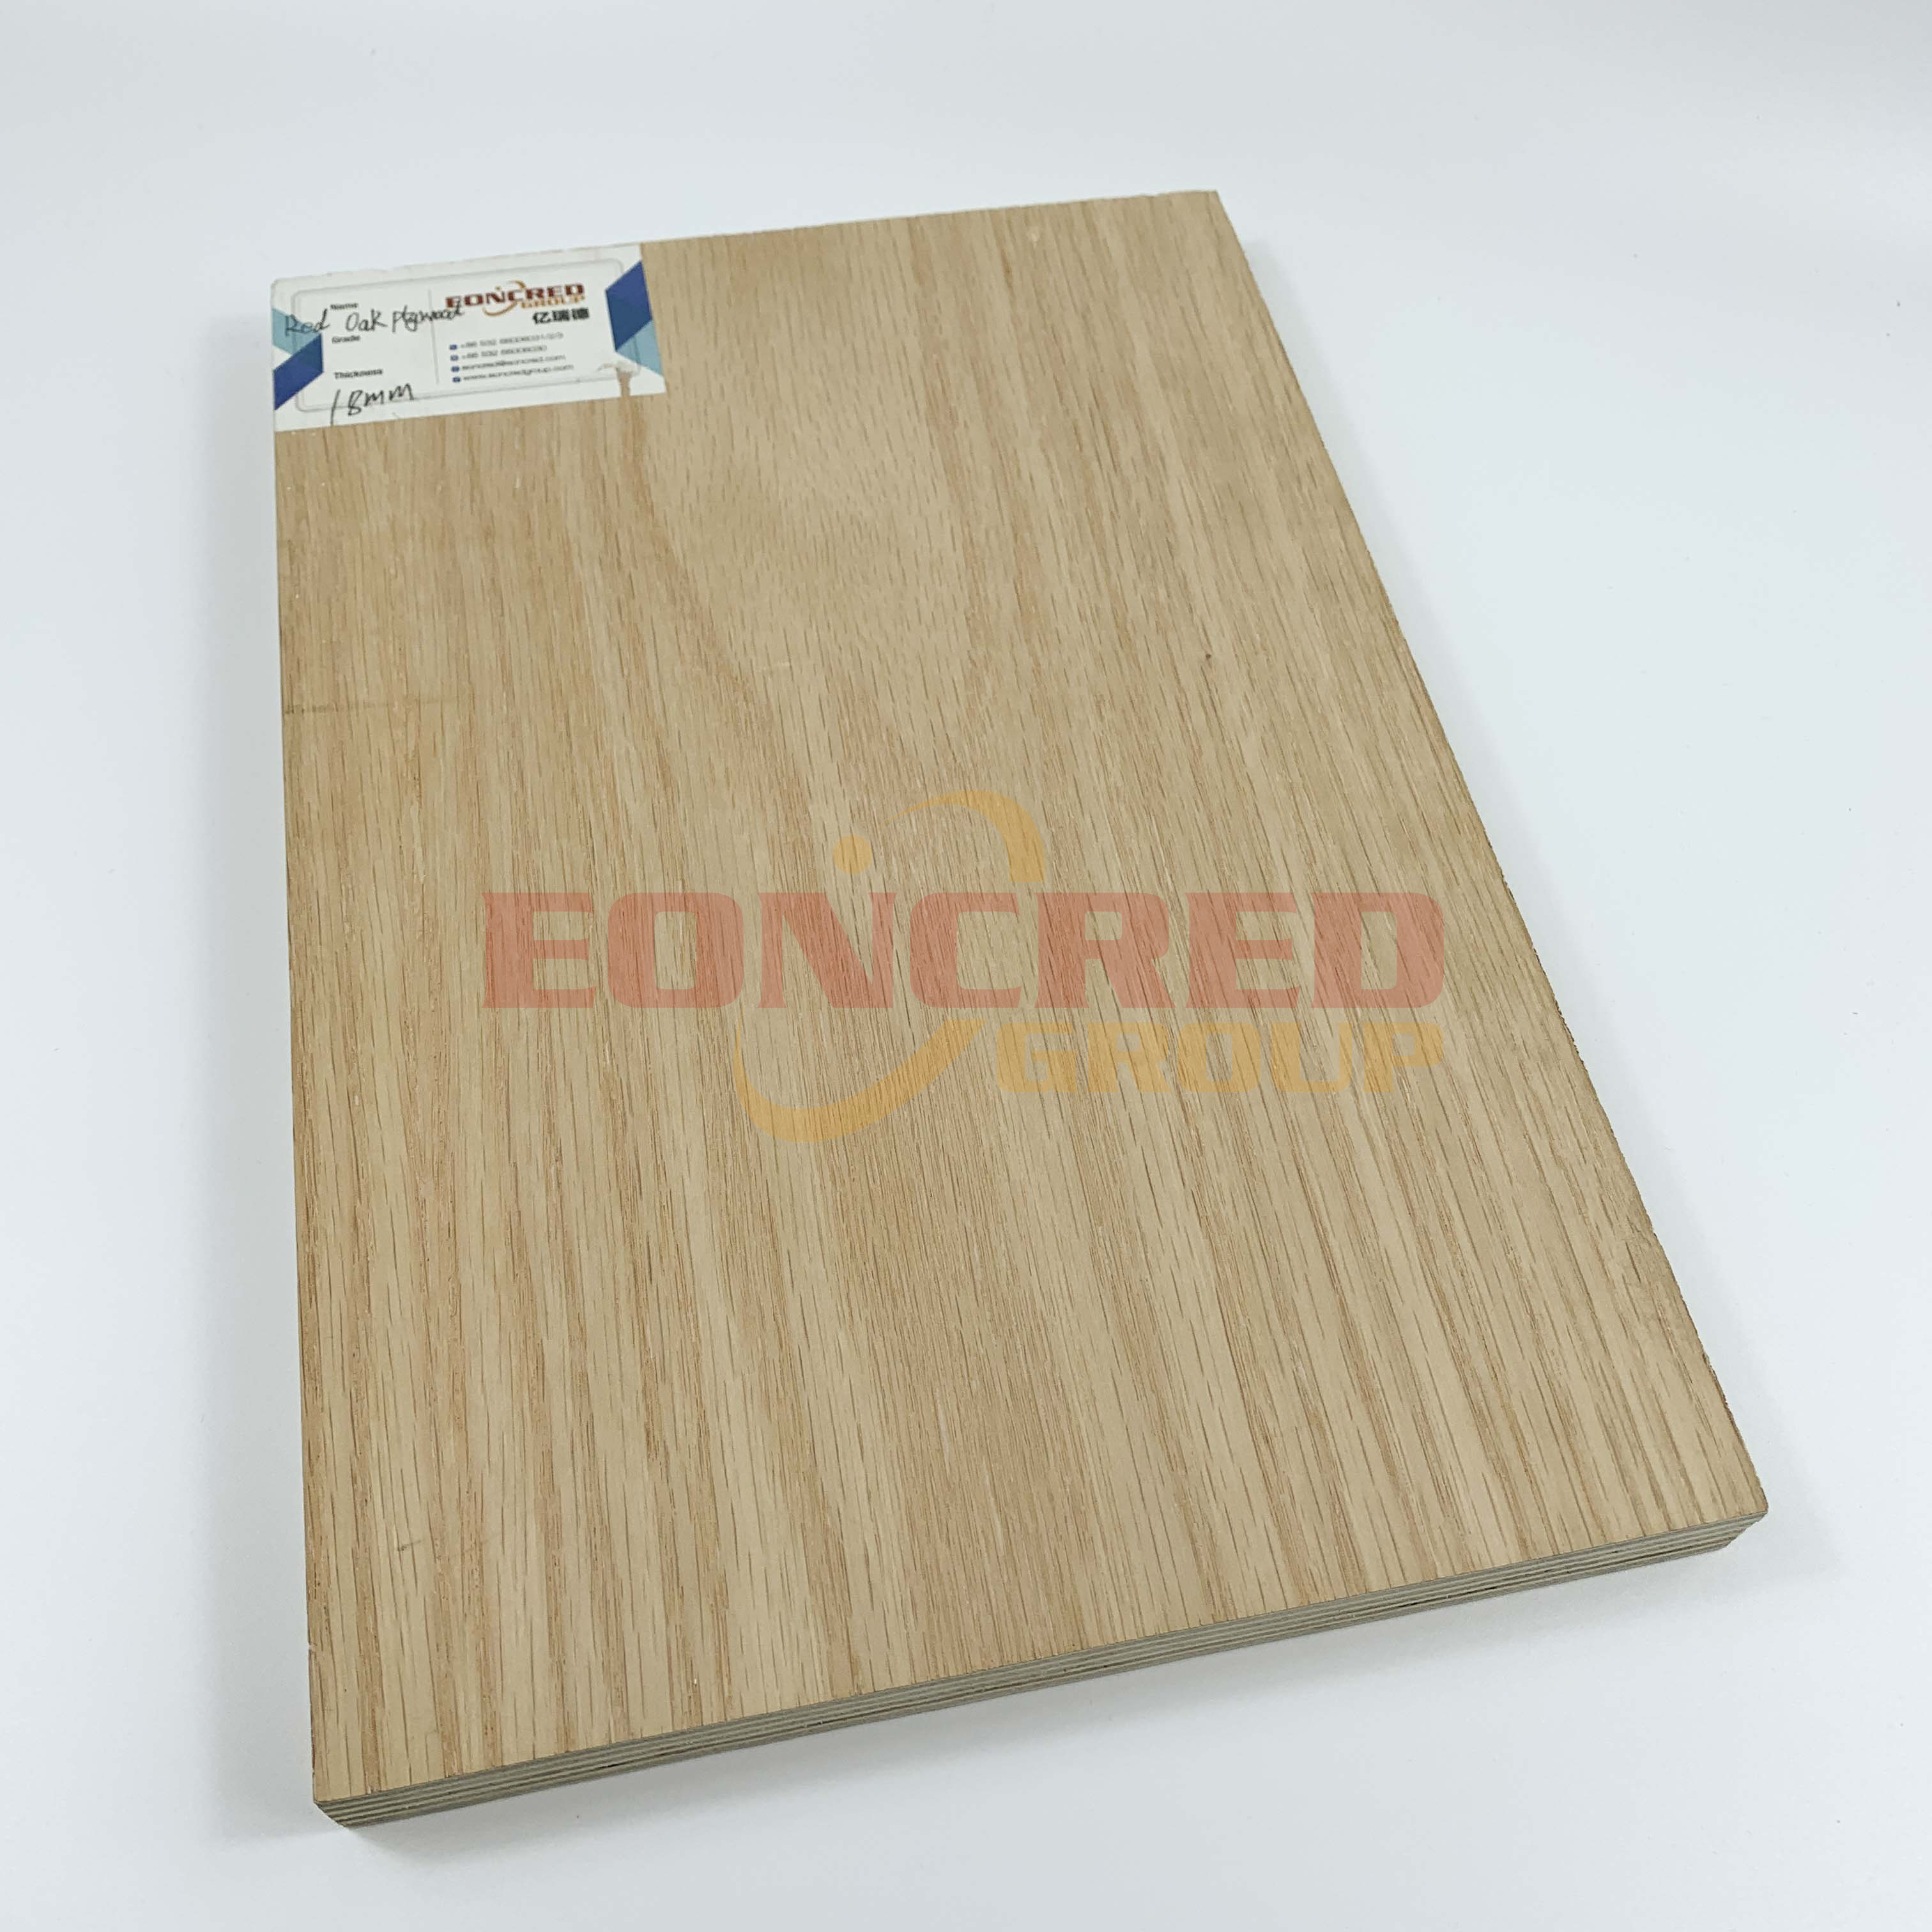  Plywood Chair Used High Quality Plywood 